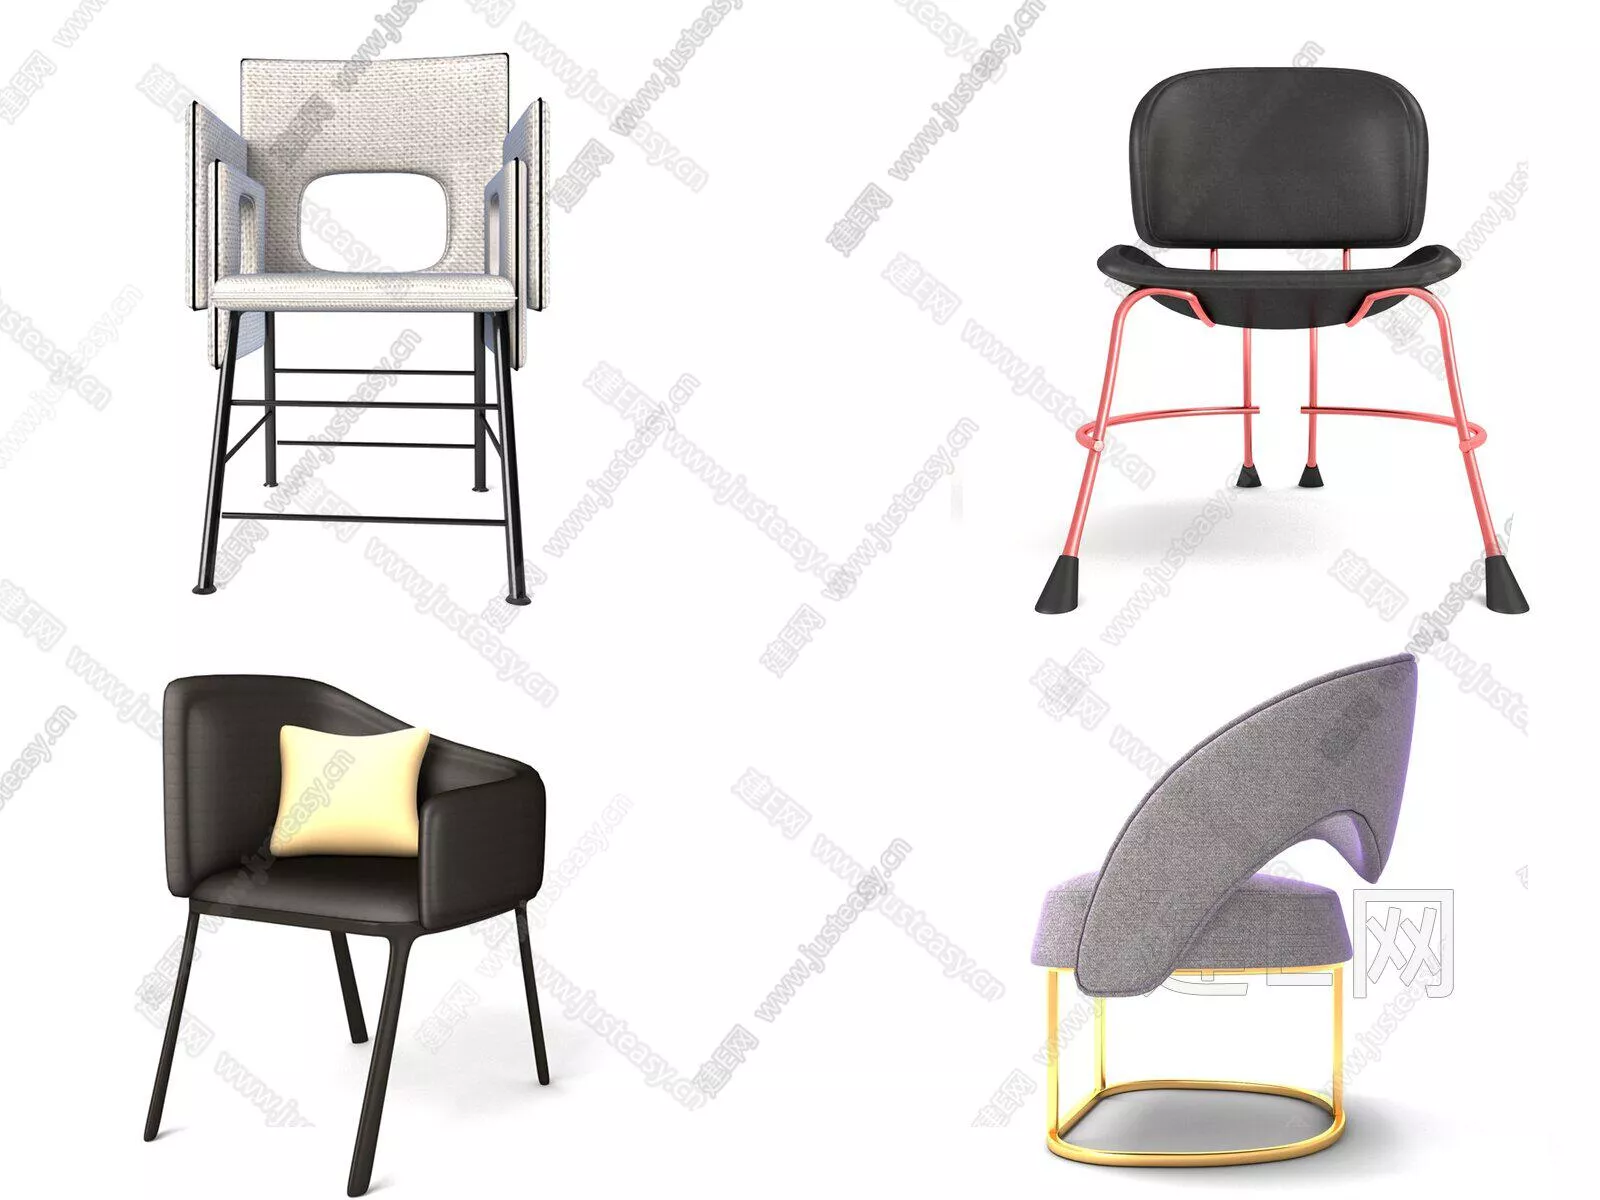 NORDIC OFFICE CHAIR - SKETCHUP 3D MODEL - ENSCAPE - 111889889